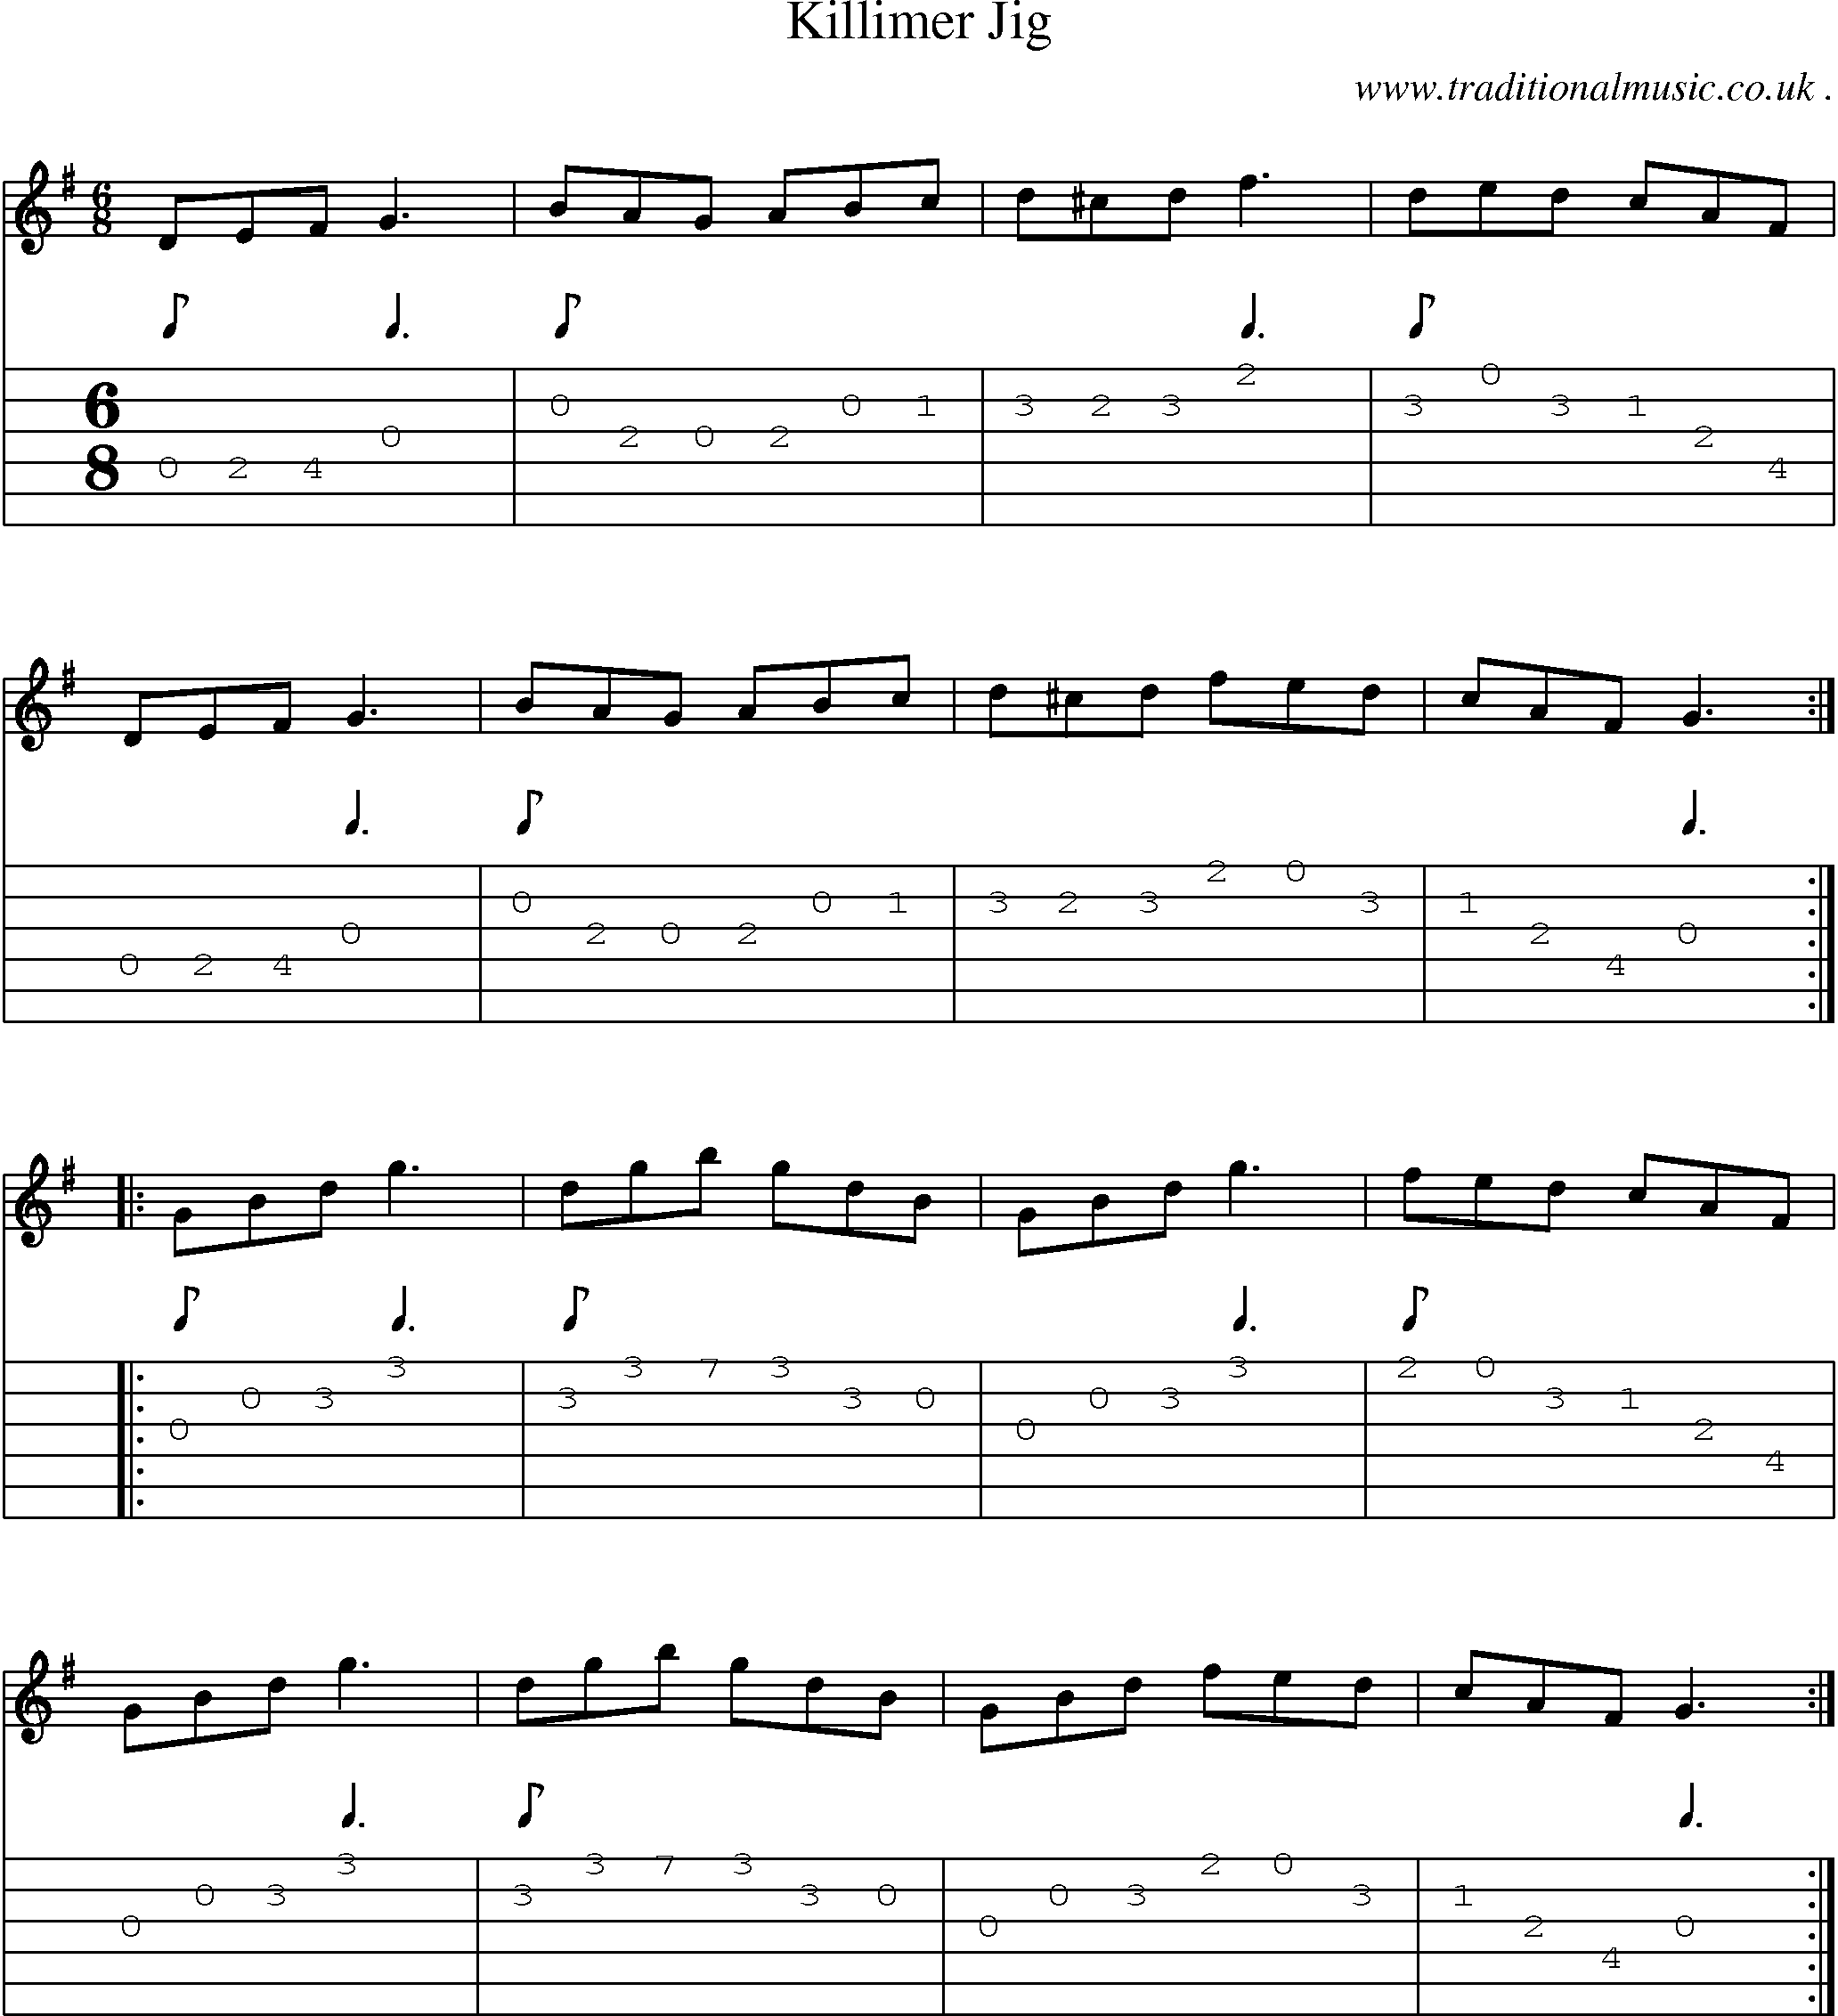 Sheet-Music and Guitar Tabs for Killimer Jig